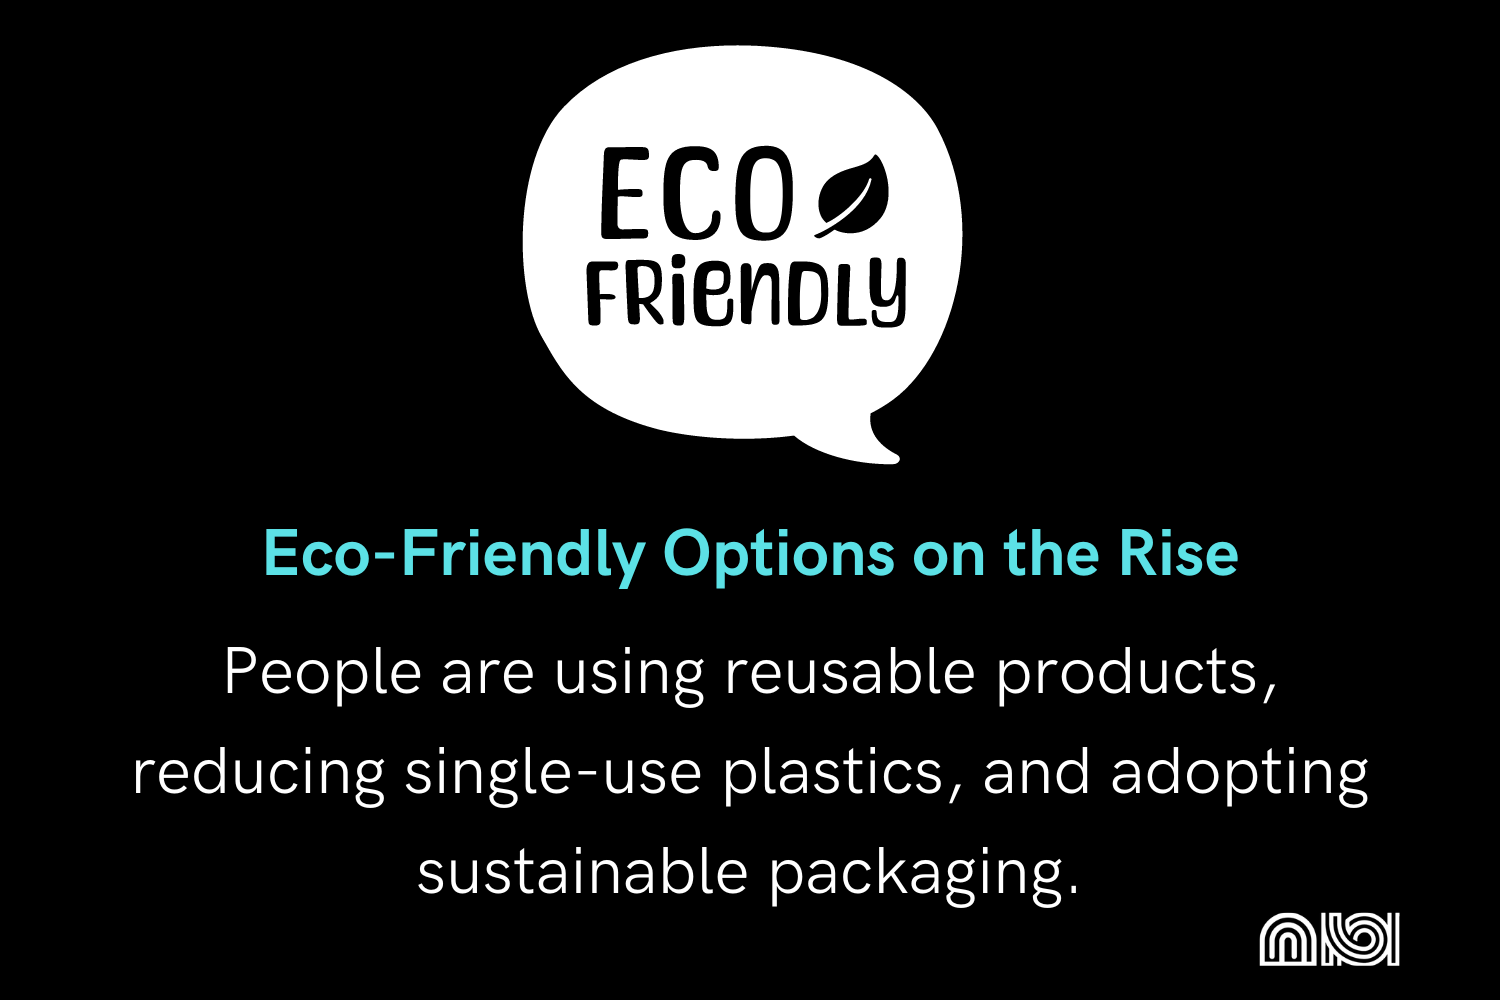 A graph showing the increasing popularity of eco-friendly choices, with a focus on the use of reusable products, reduction of single-use plastics, and adoption of sustainable packaging.